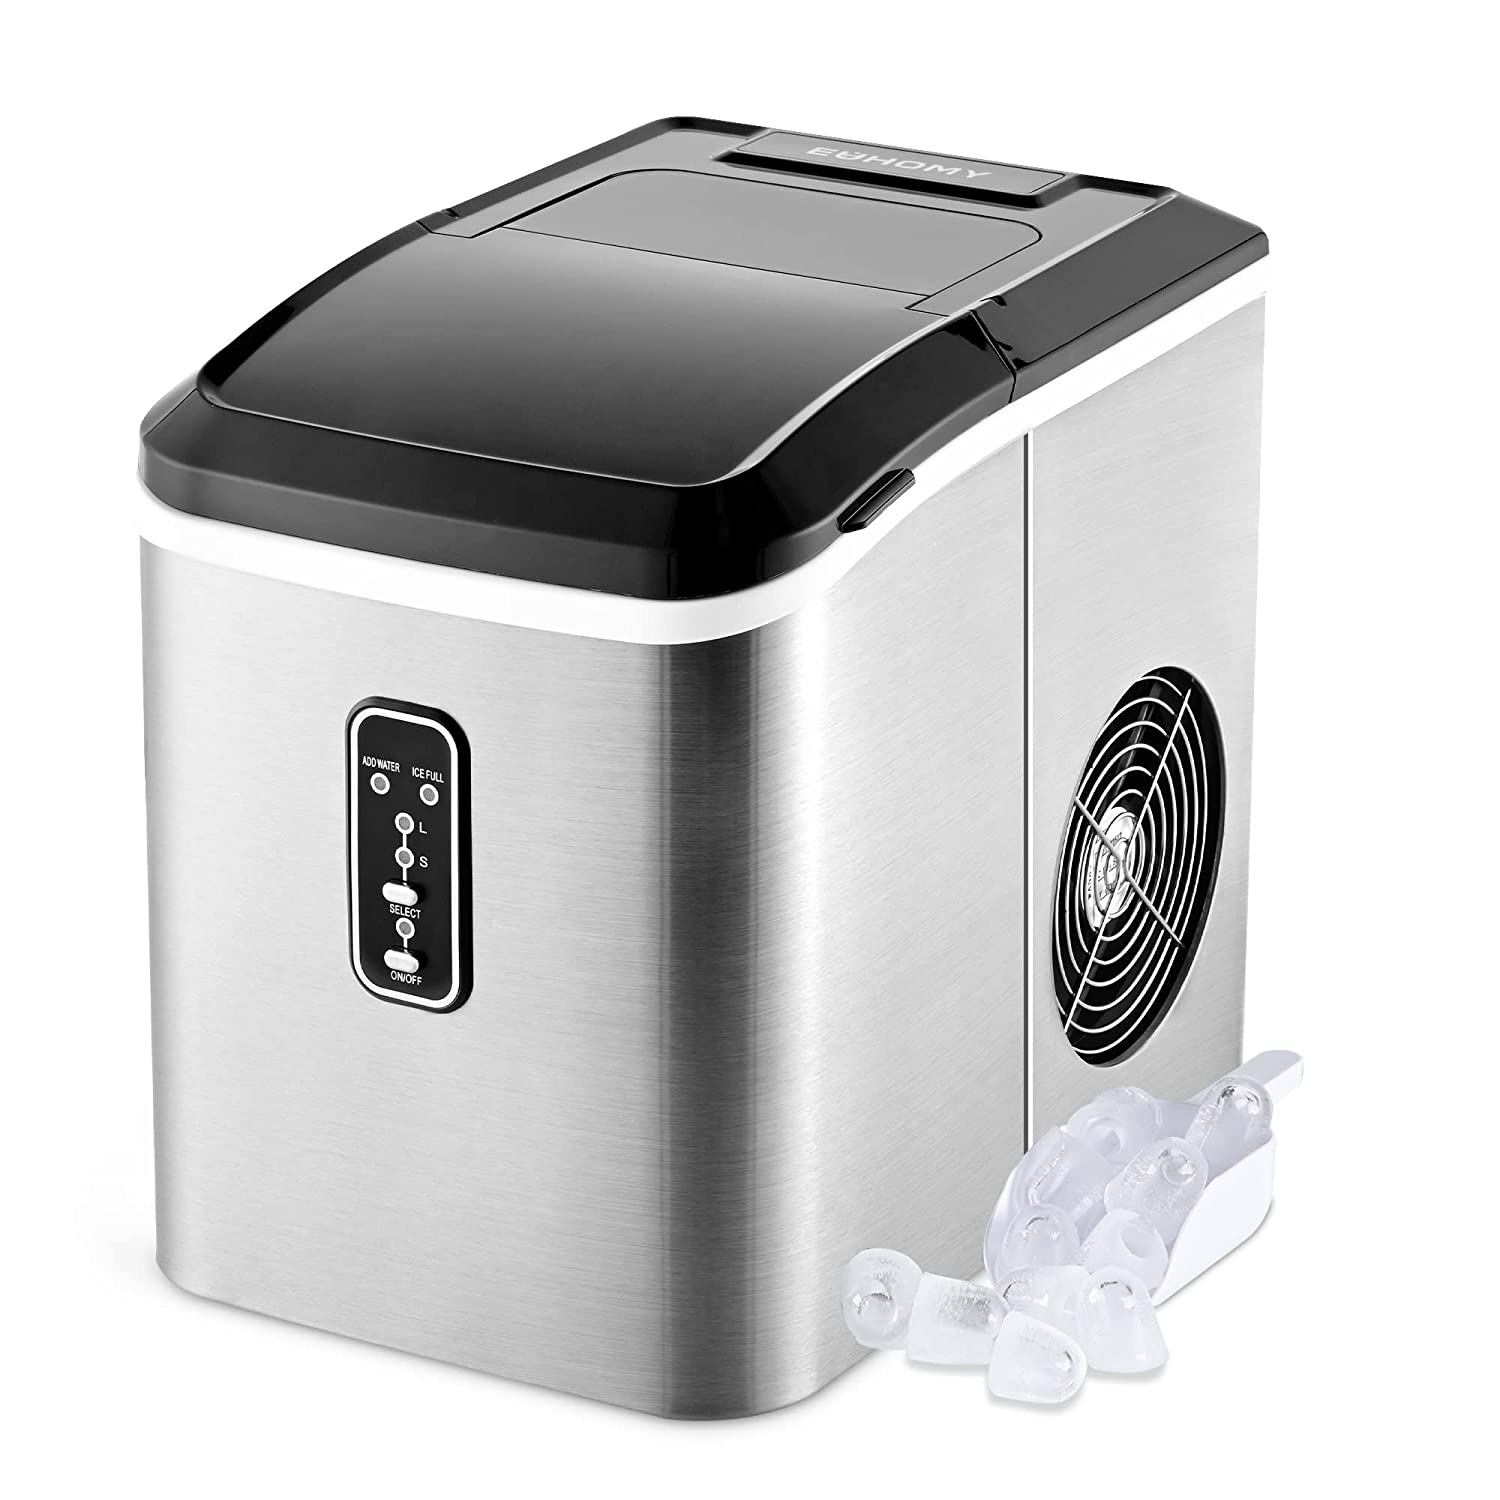  Portable Ice Maker for Countertop, 9 Ice Cube Ready in